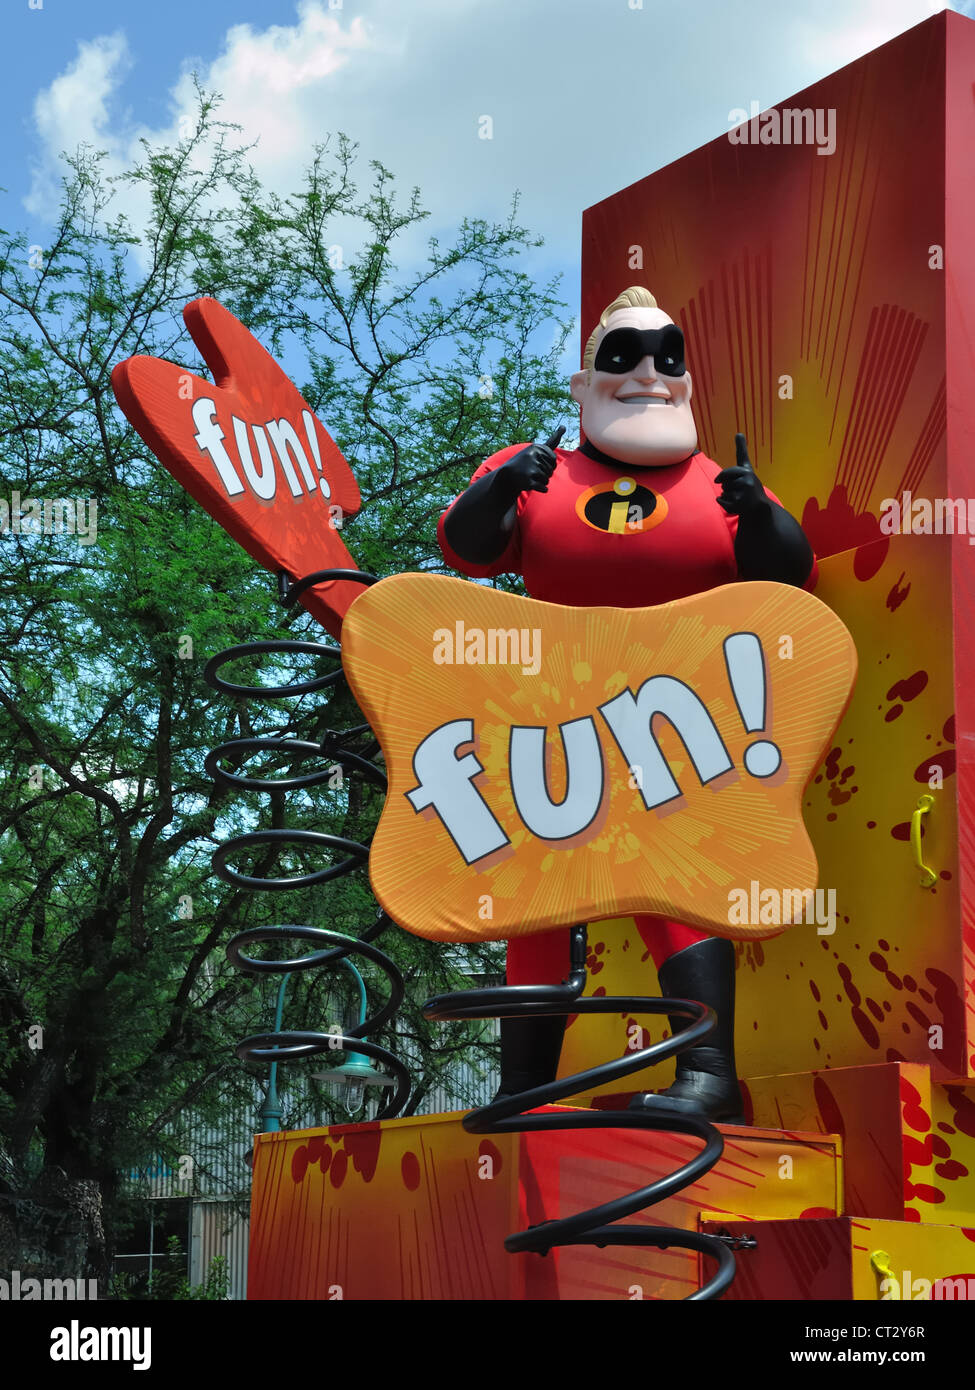 Mr Incredible (Bob Parr) from the Incredibles on a float. Disney theme parks Stock Photo